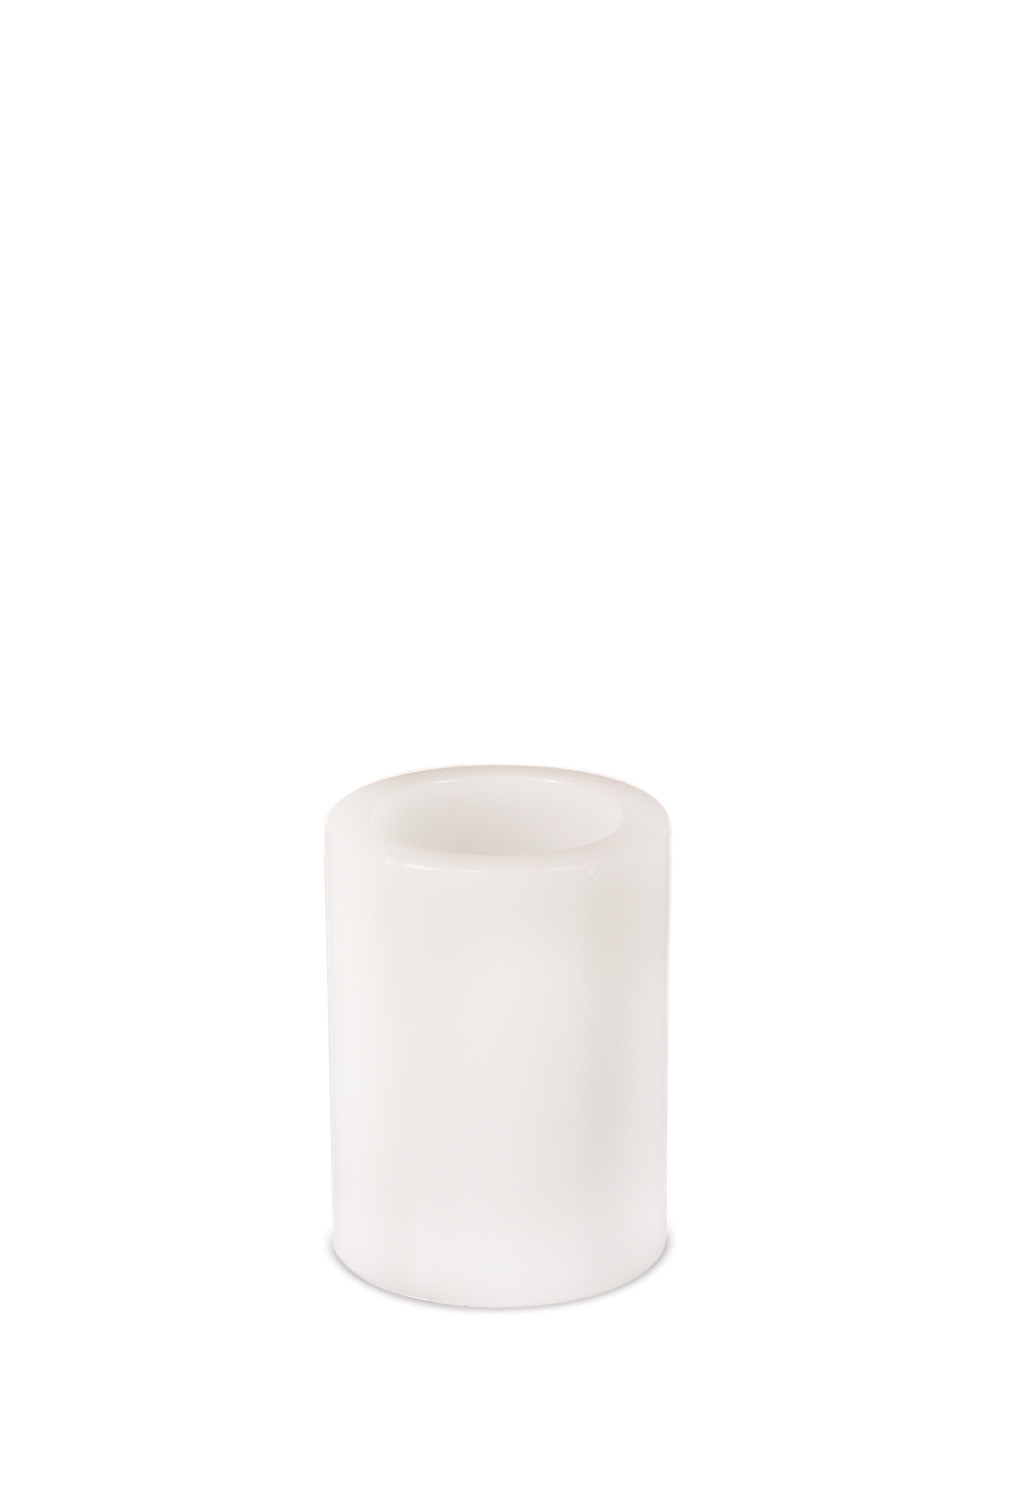 LED Wax Pillar Candle (Set of 6) 3"Dx4"H Wax/Plastic - 2 C Batteries Not Incld.